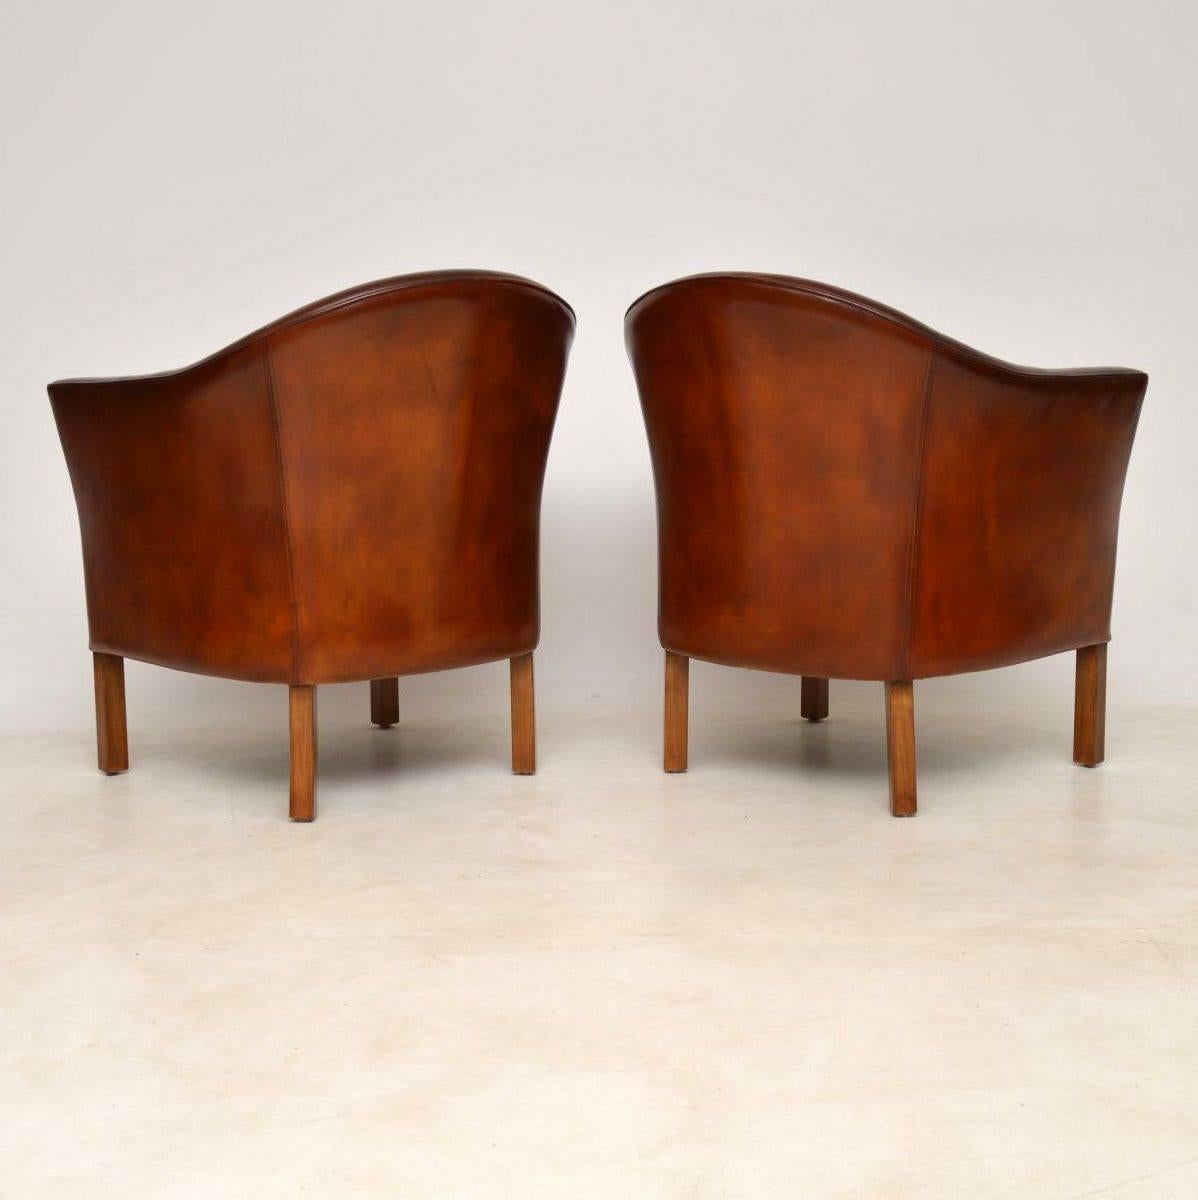 Mid-20th Century 1950s Pair of Danish Vintage Leather Armchairs by Mogens Hansen